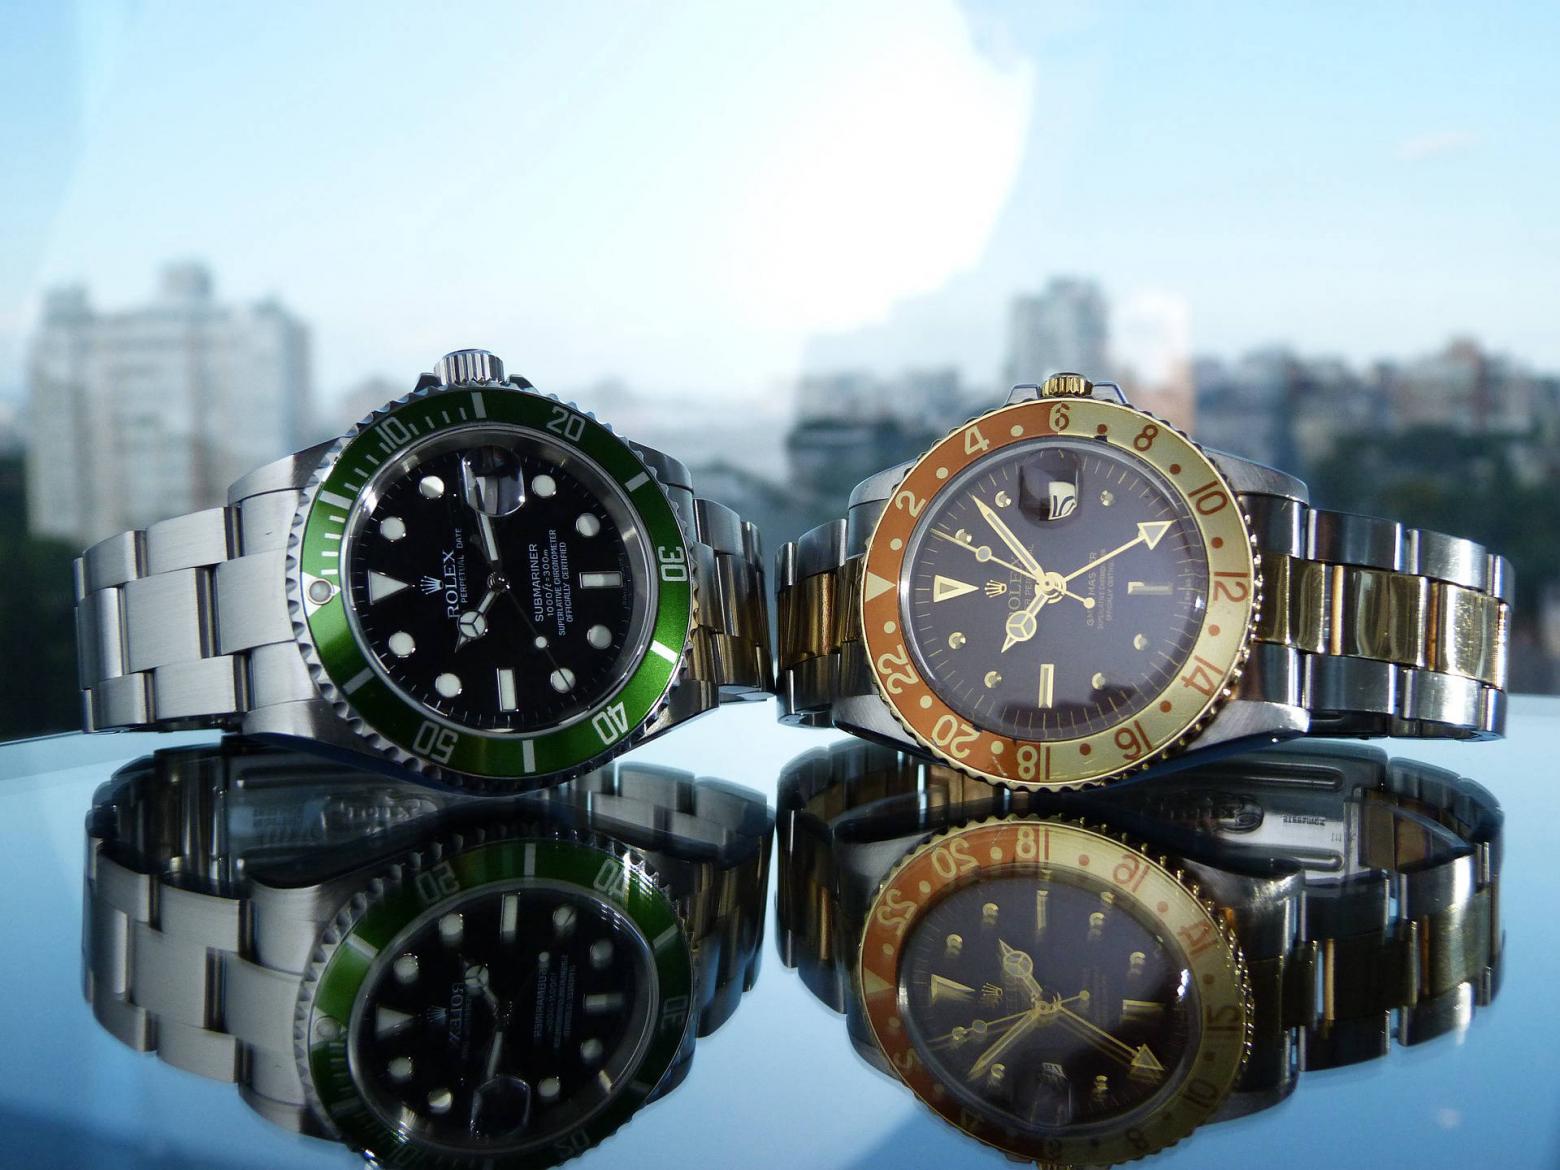 What Are The Different Types Of Crystals In Rolex Watches?